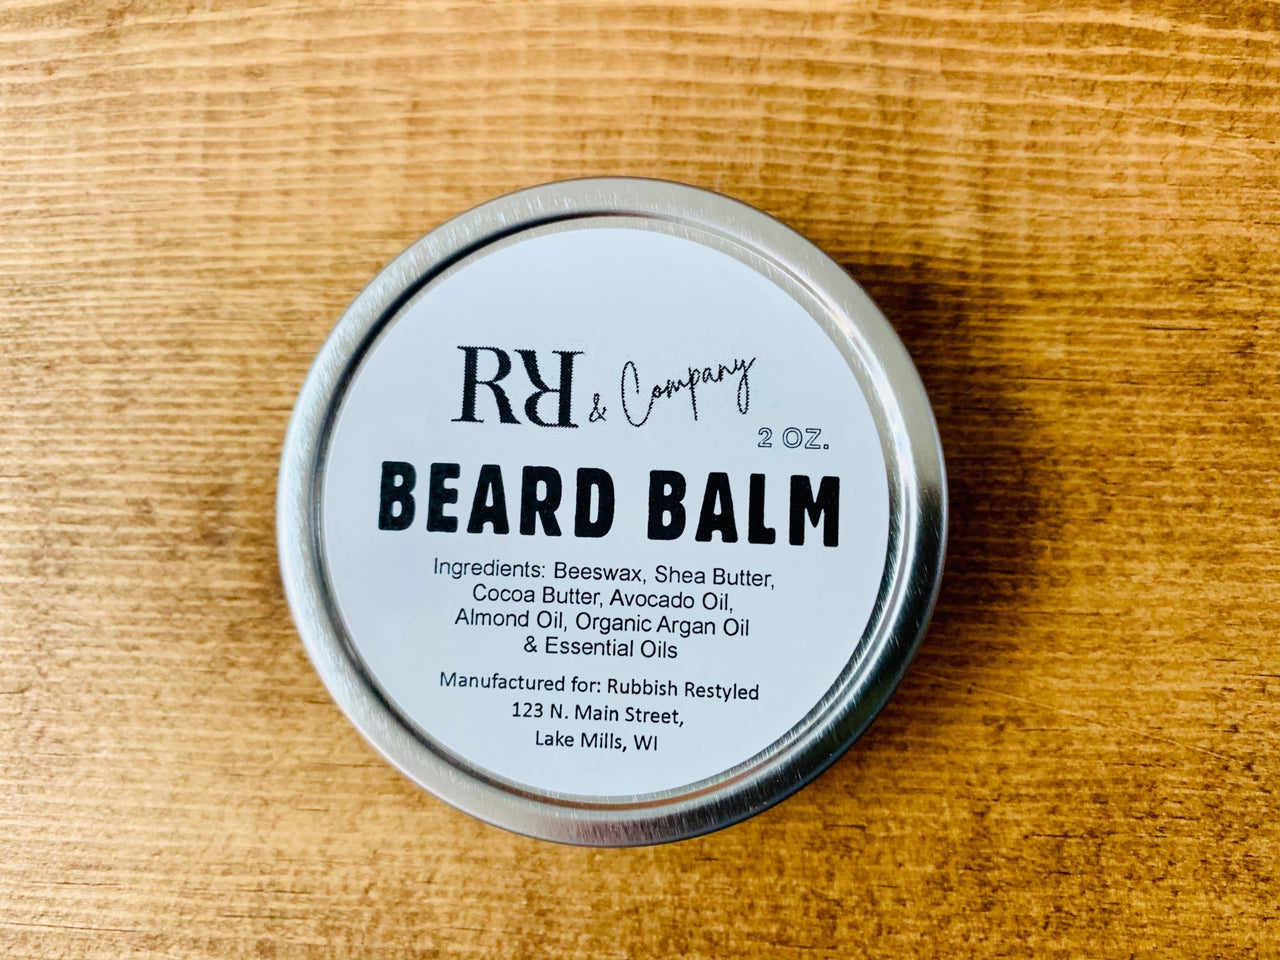 Beard balm - RR & CO - Rubbish Restyled